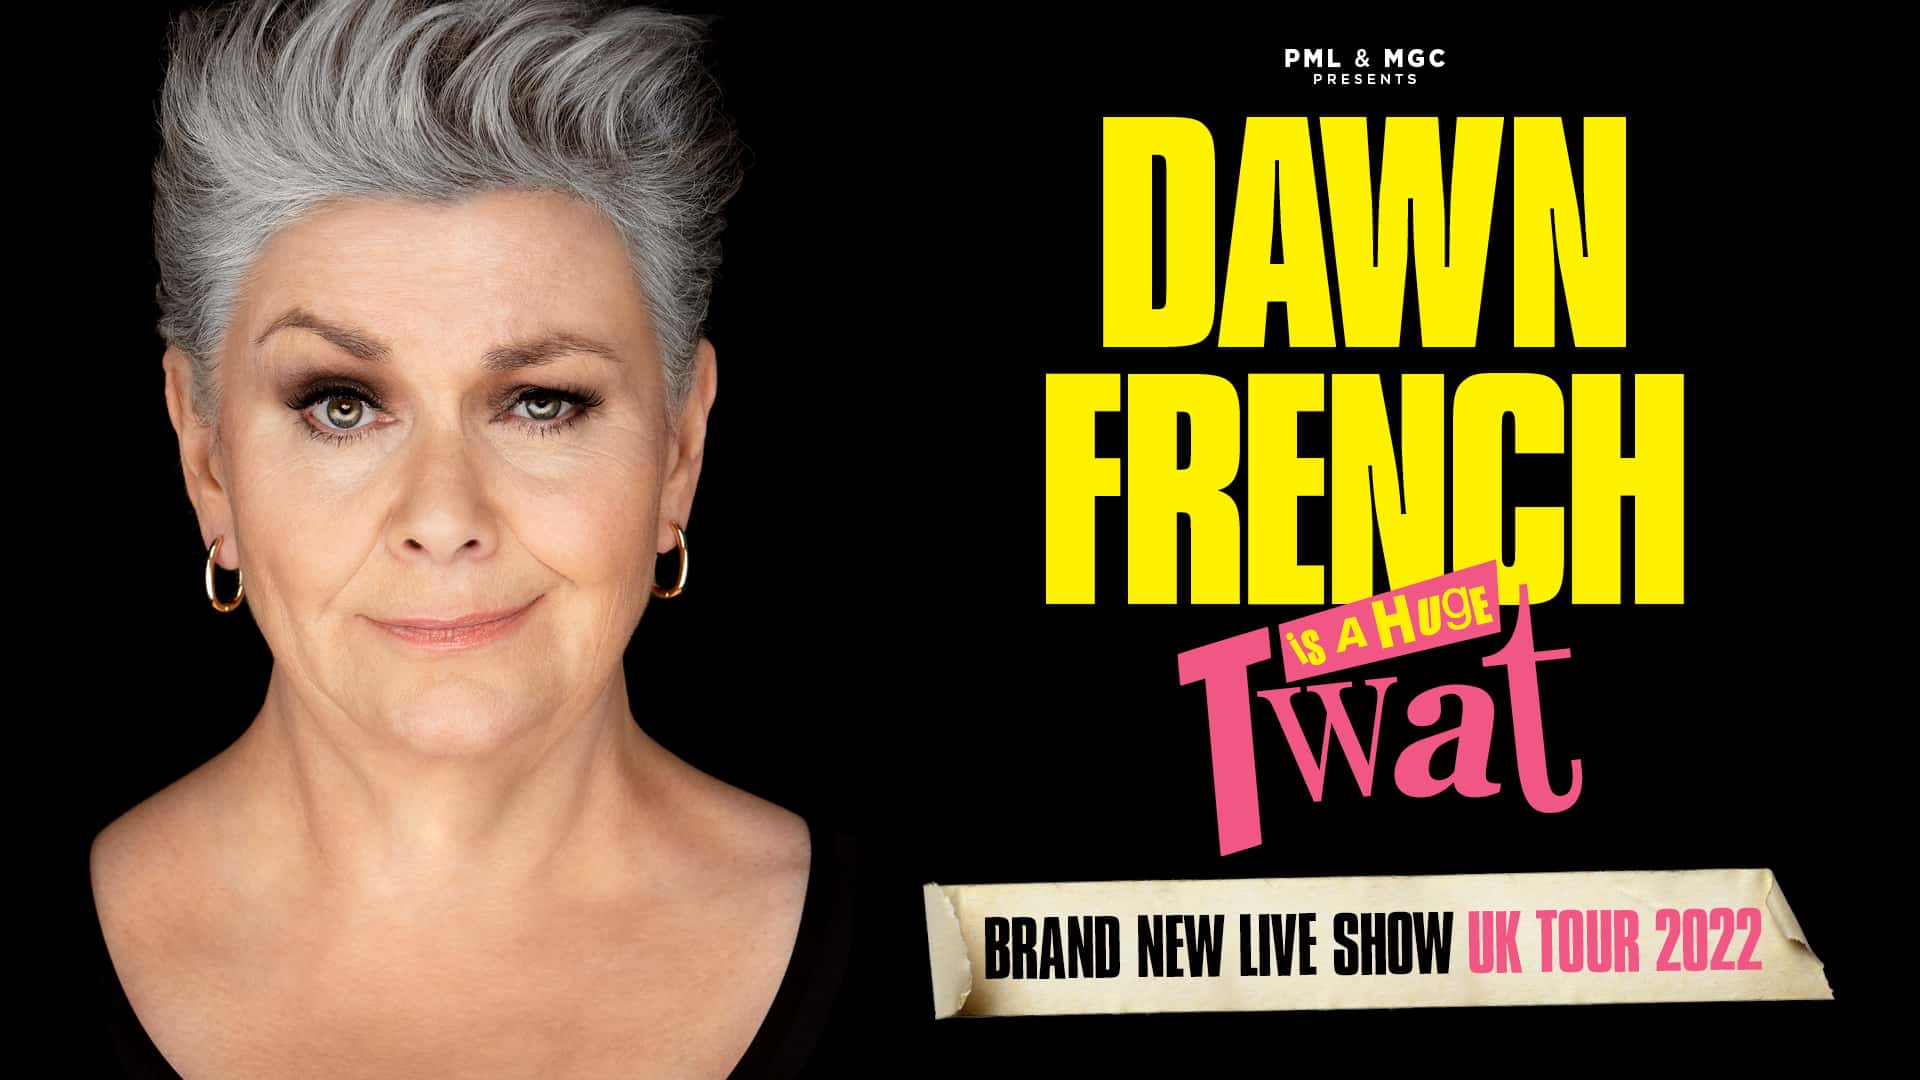 Dawn French Is A Huge Twat tour image